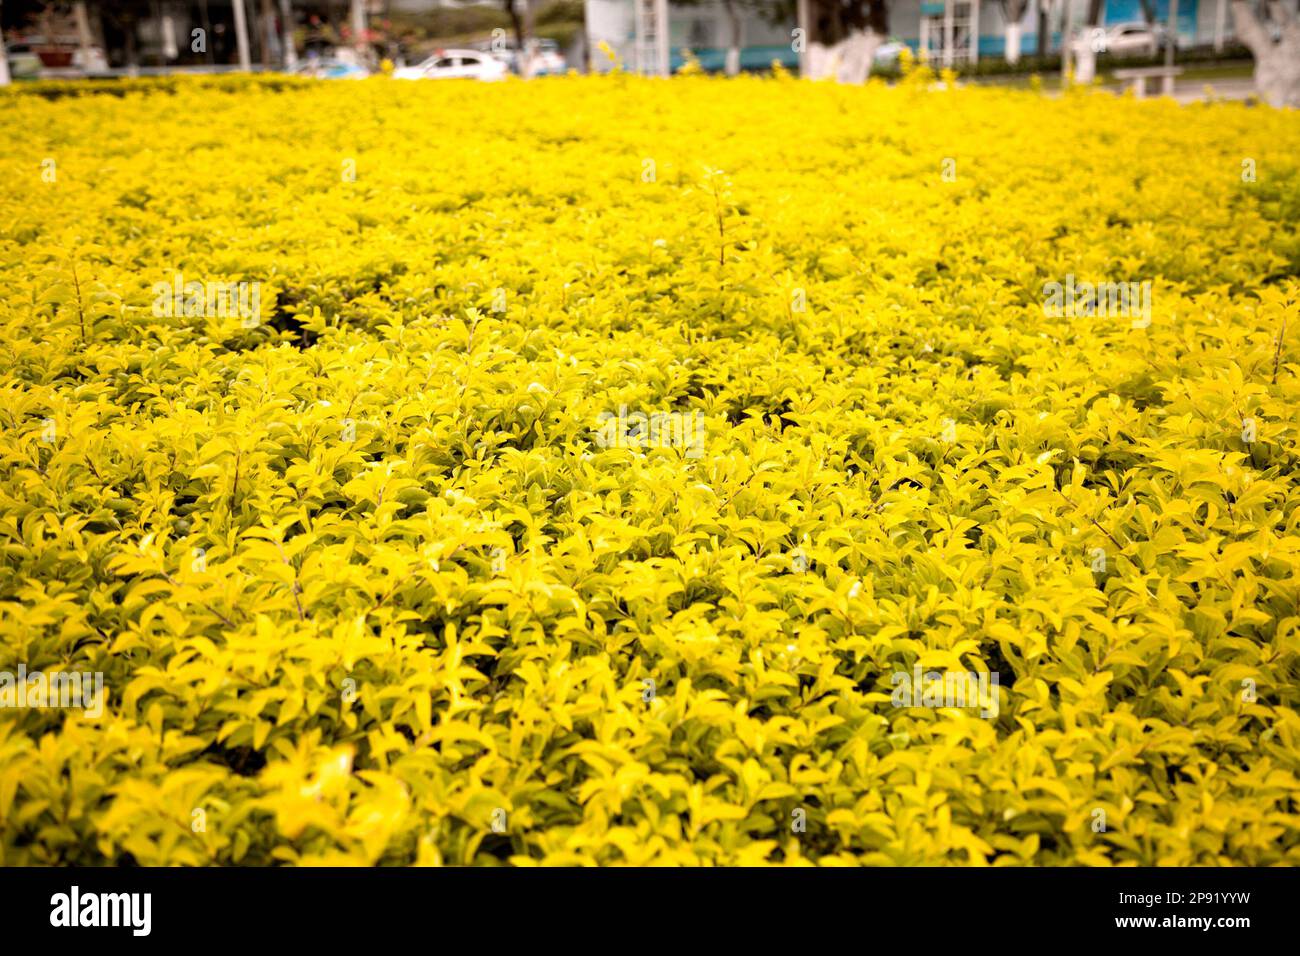 Autumn bushes foliage on a city street background. Yellow flowerbed next to a road with a copy space Stock Photo